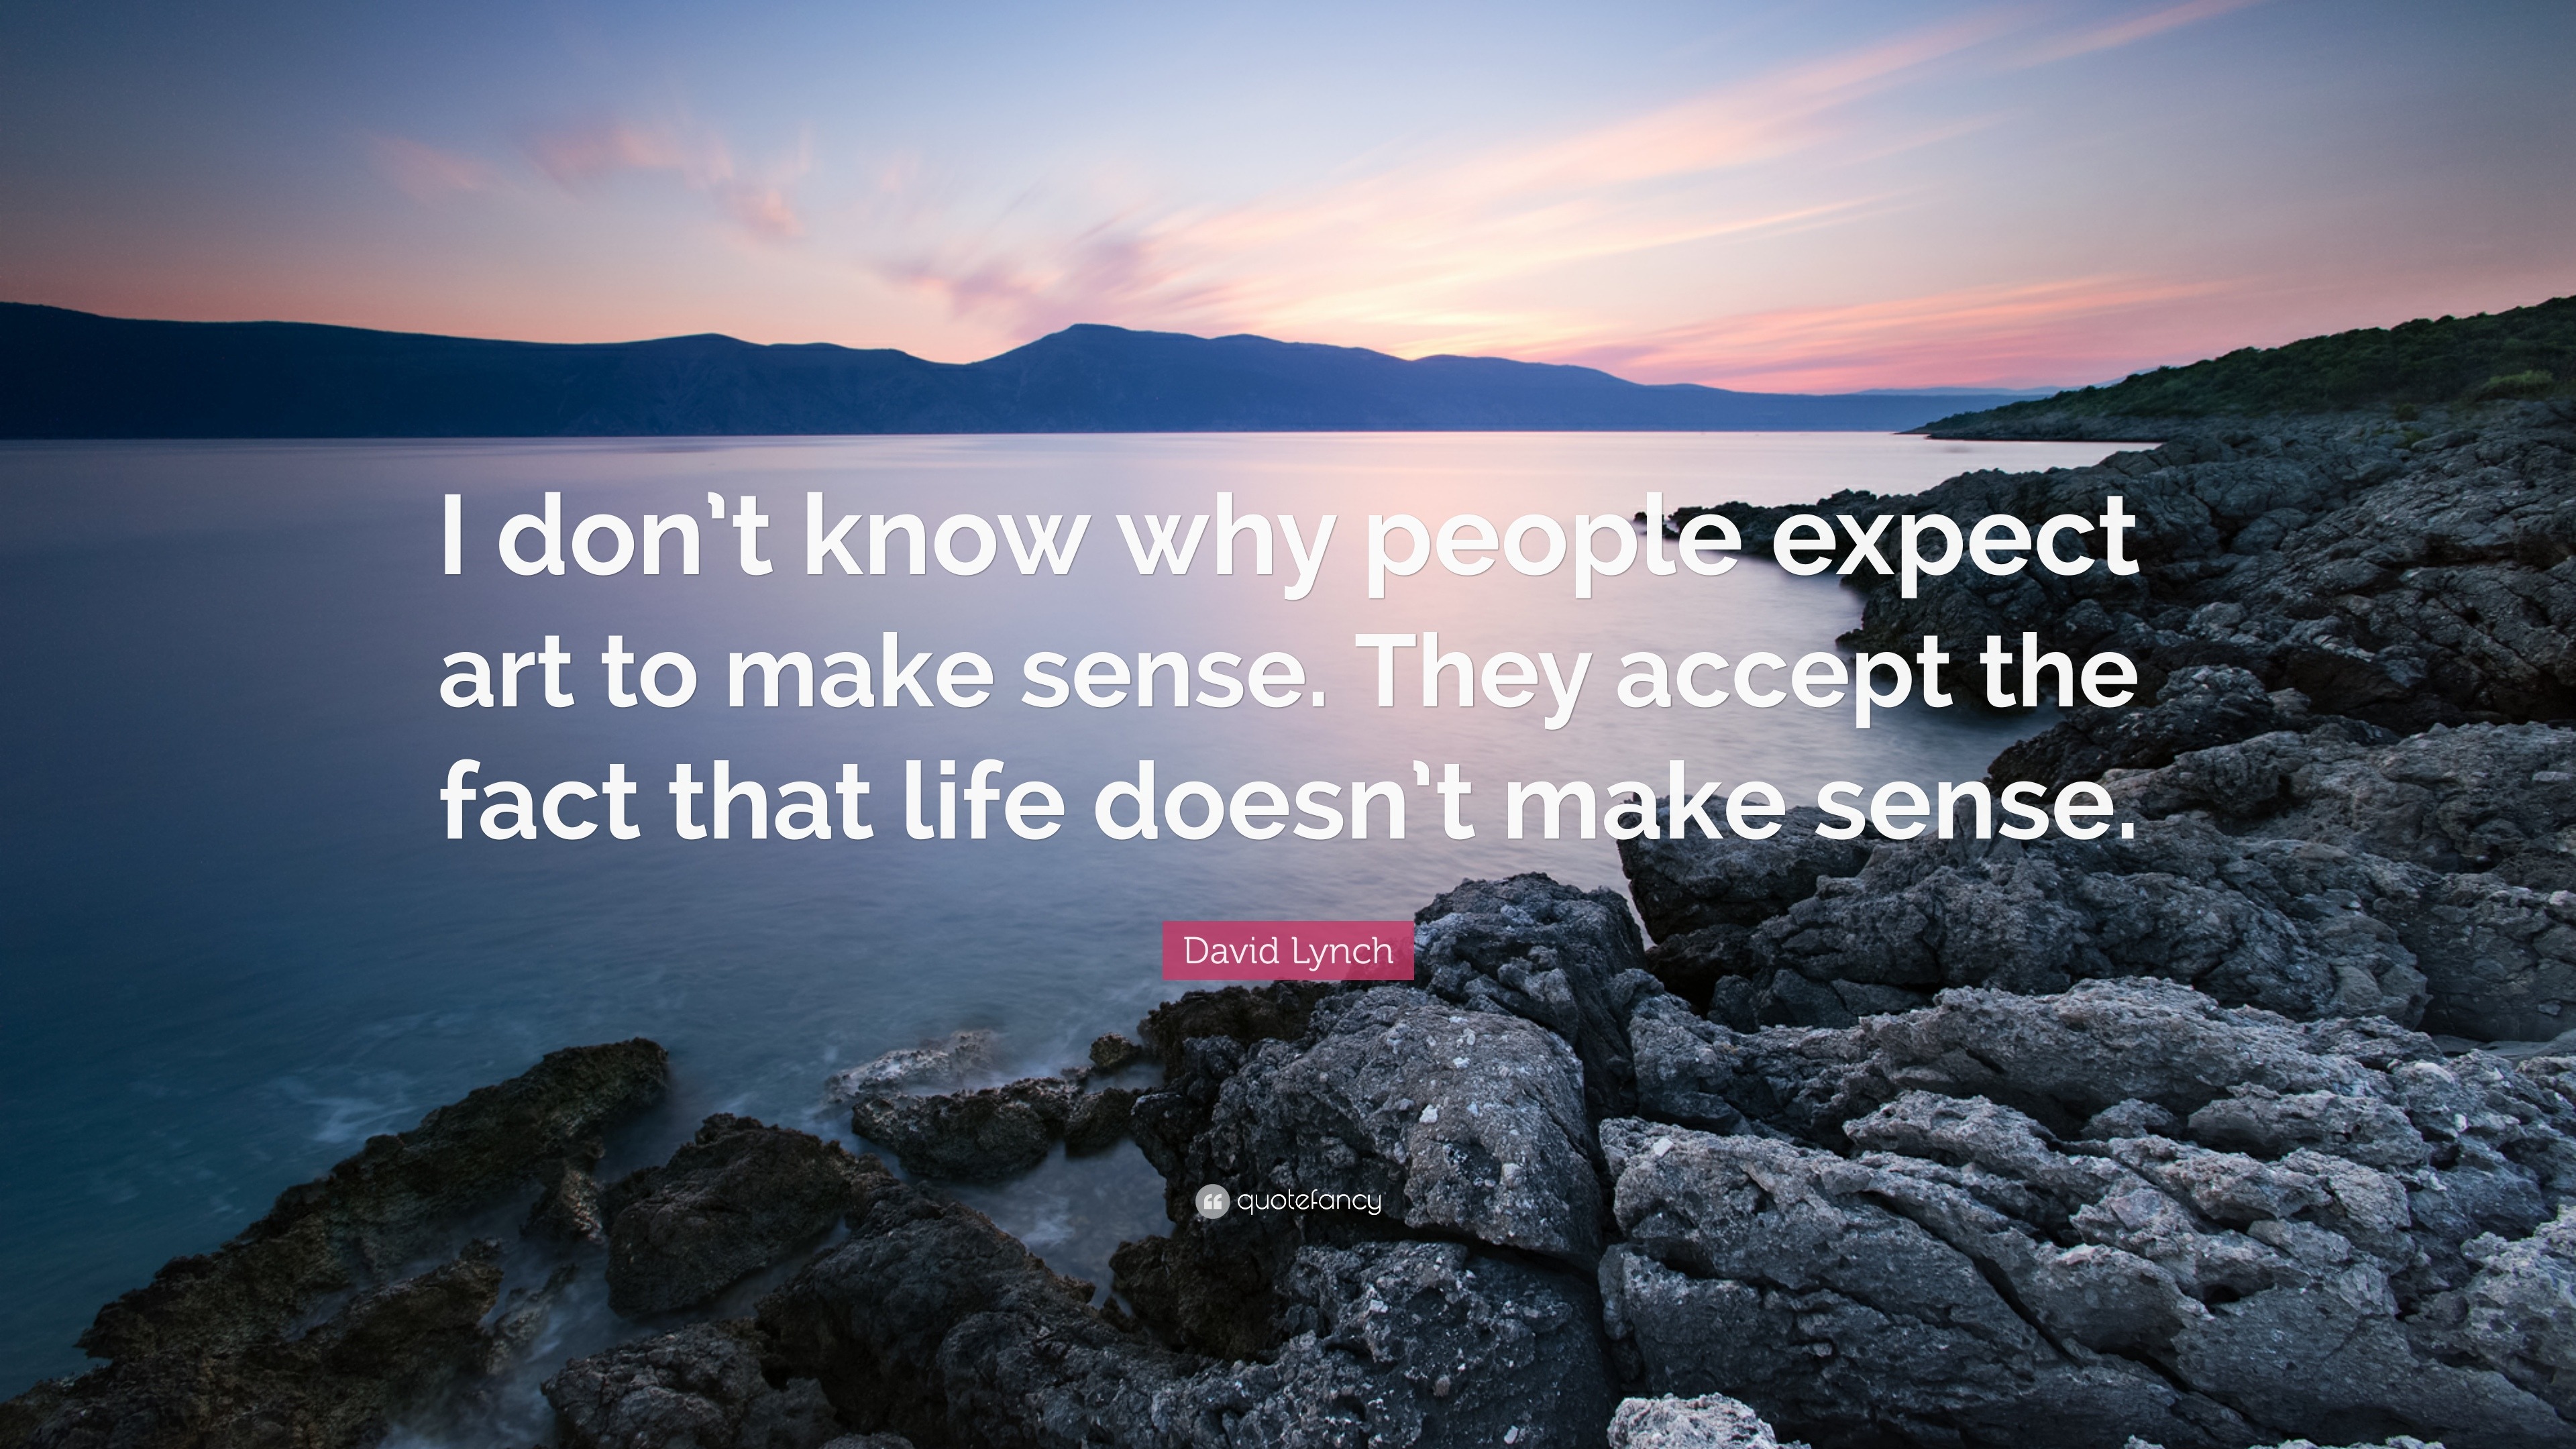 David Lynch Quote “I don t know why people expect art to make